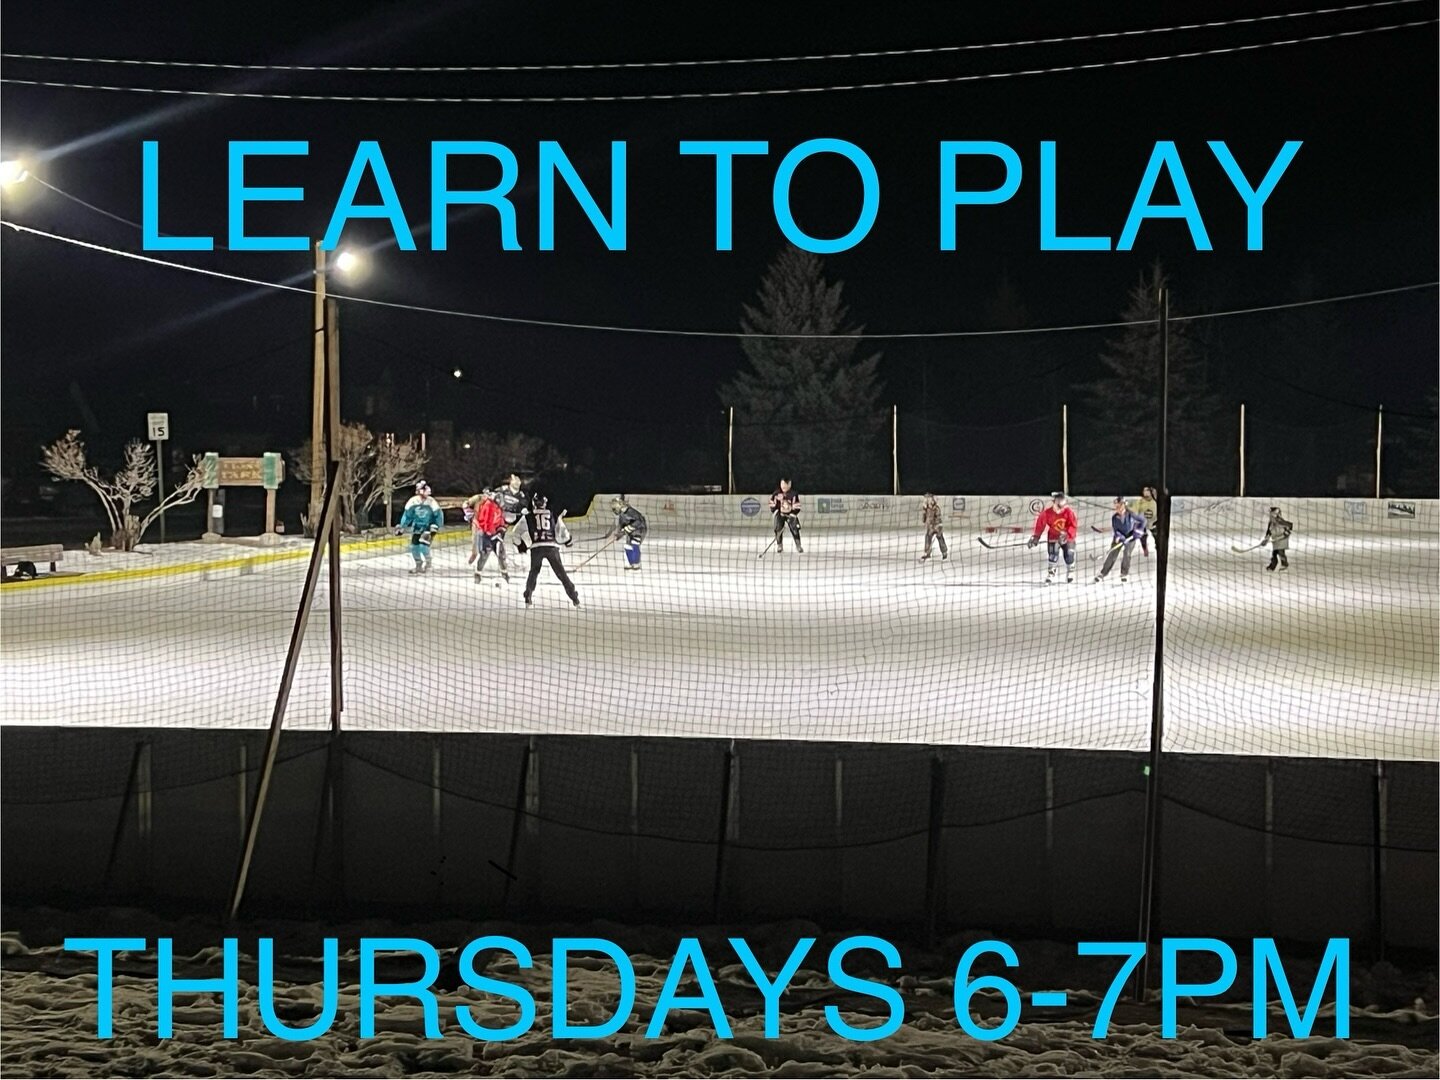 The ice is back and so is Adult Learn to play night! See you tonight and let&rsquo;s learn to fly!